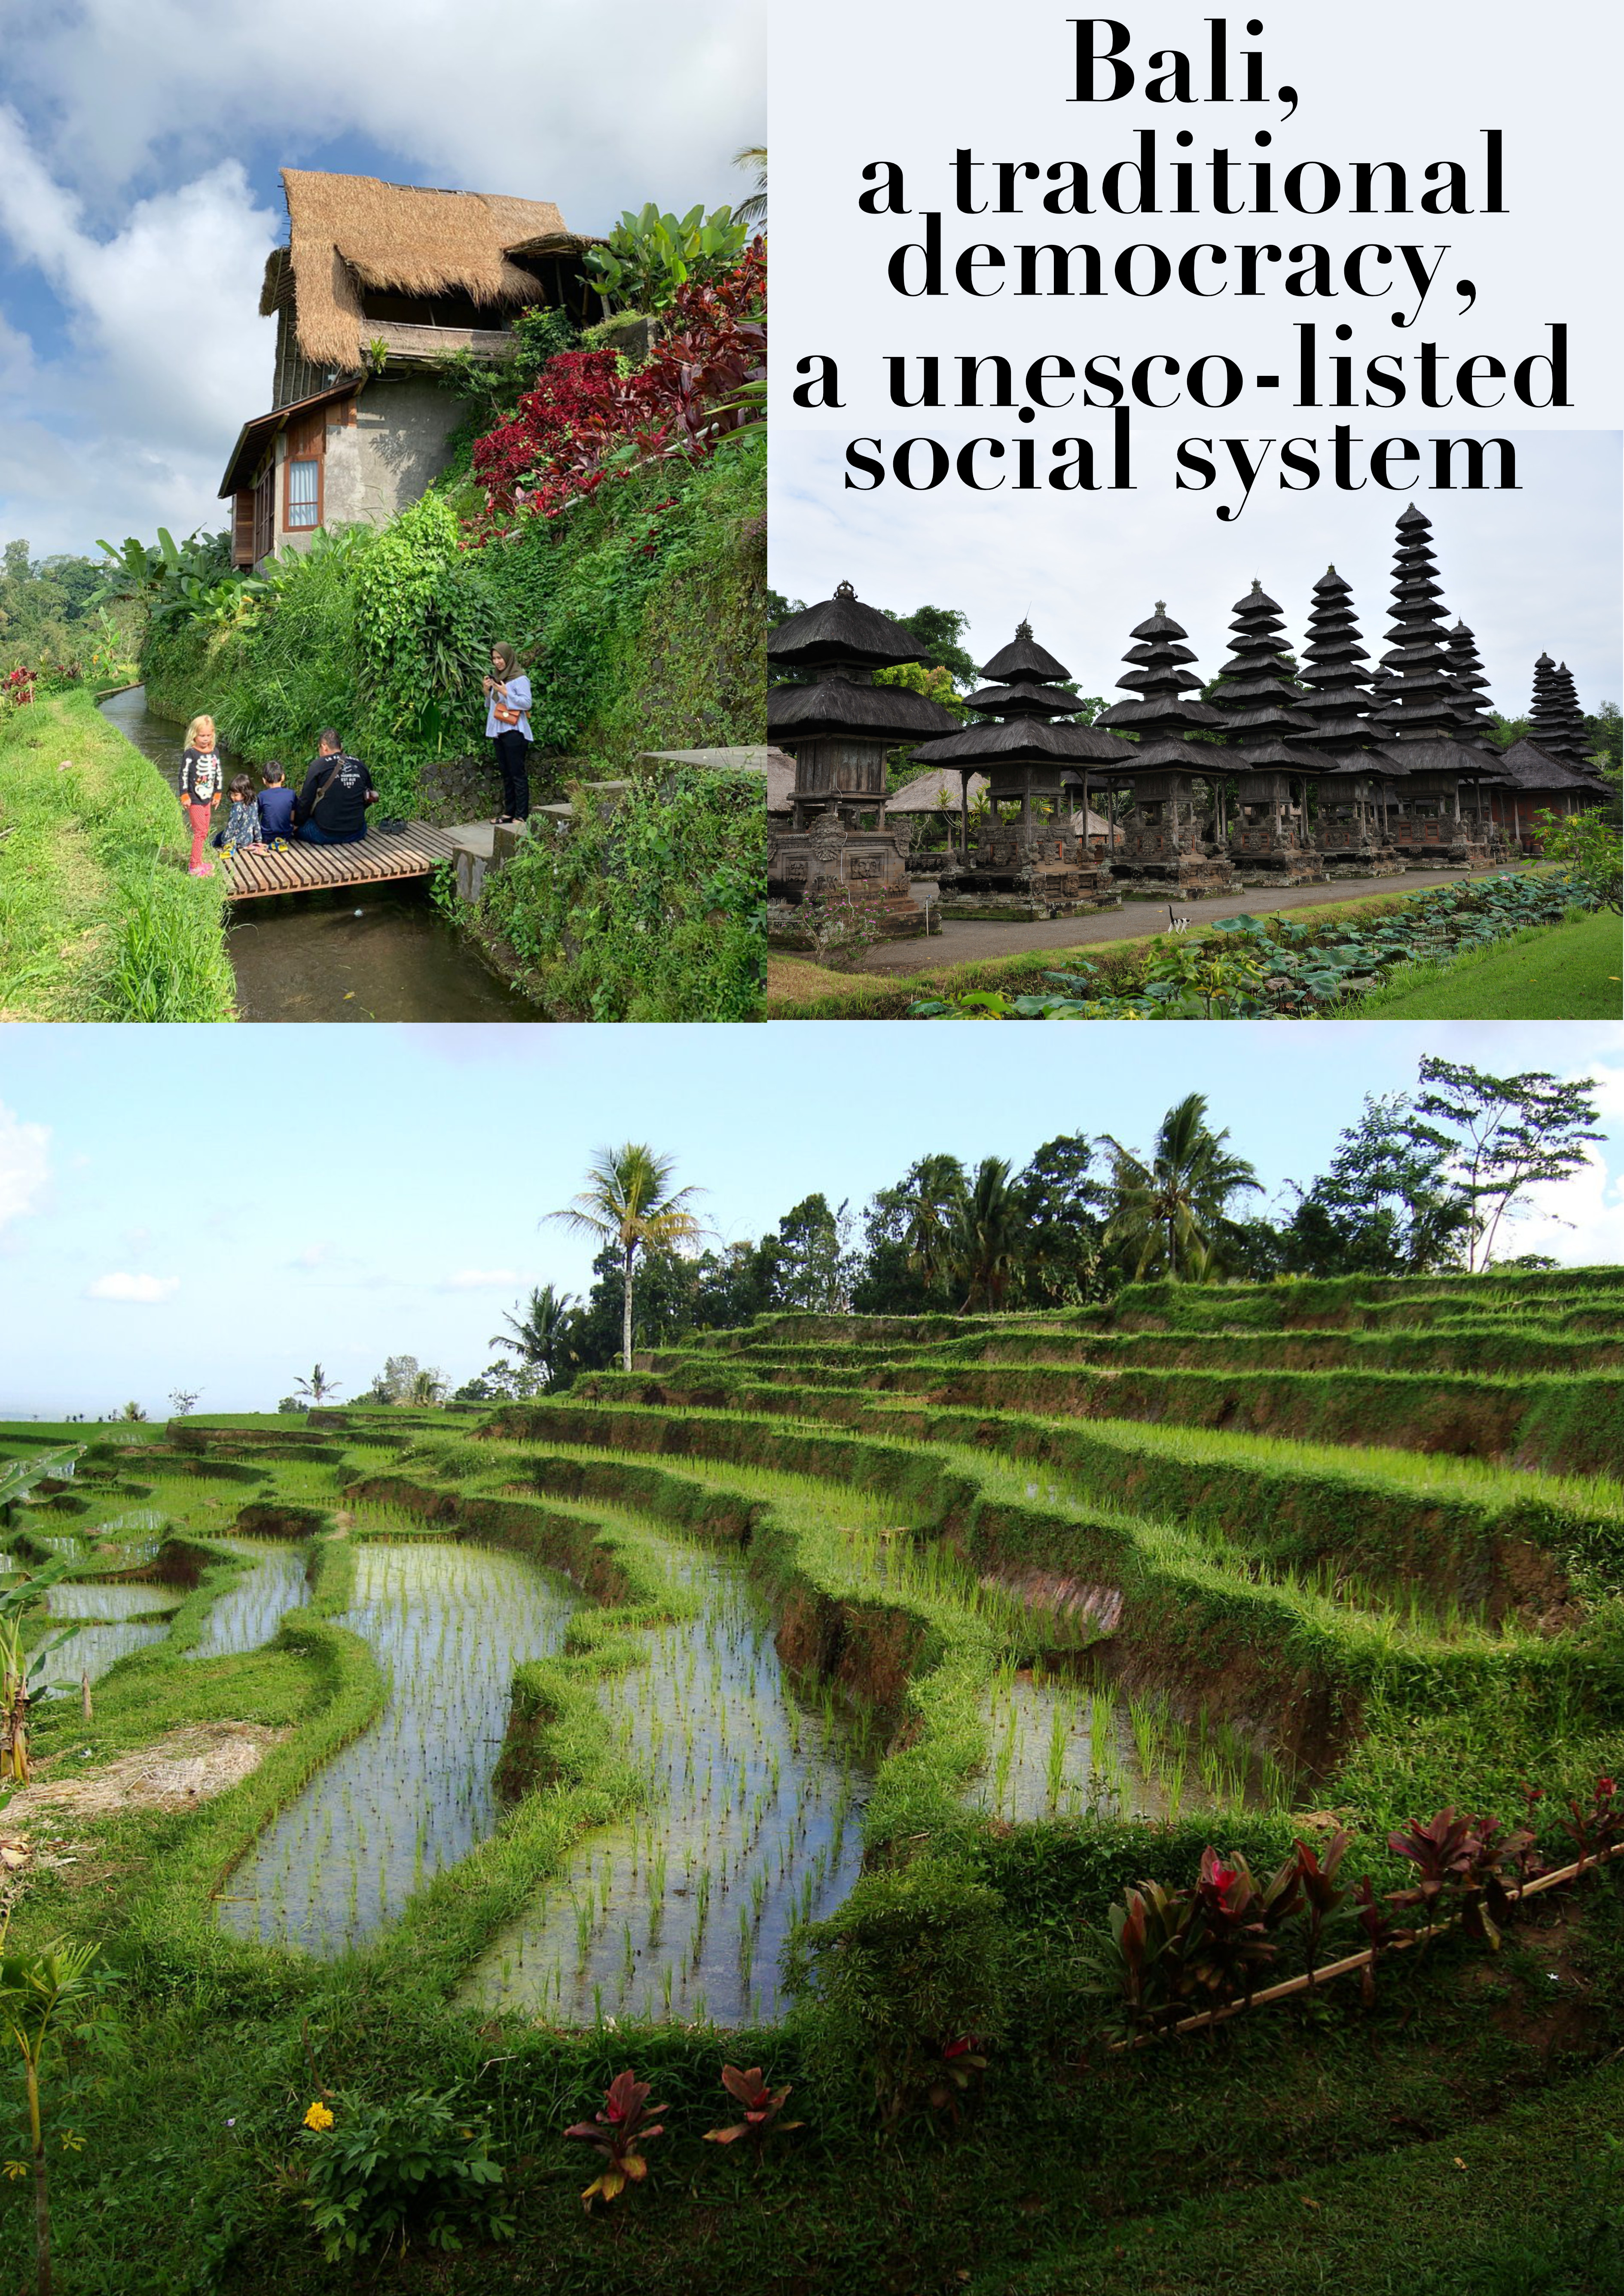 Bali, a traditional democracy, a unesco-listed social system